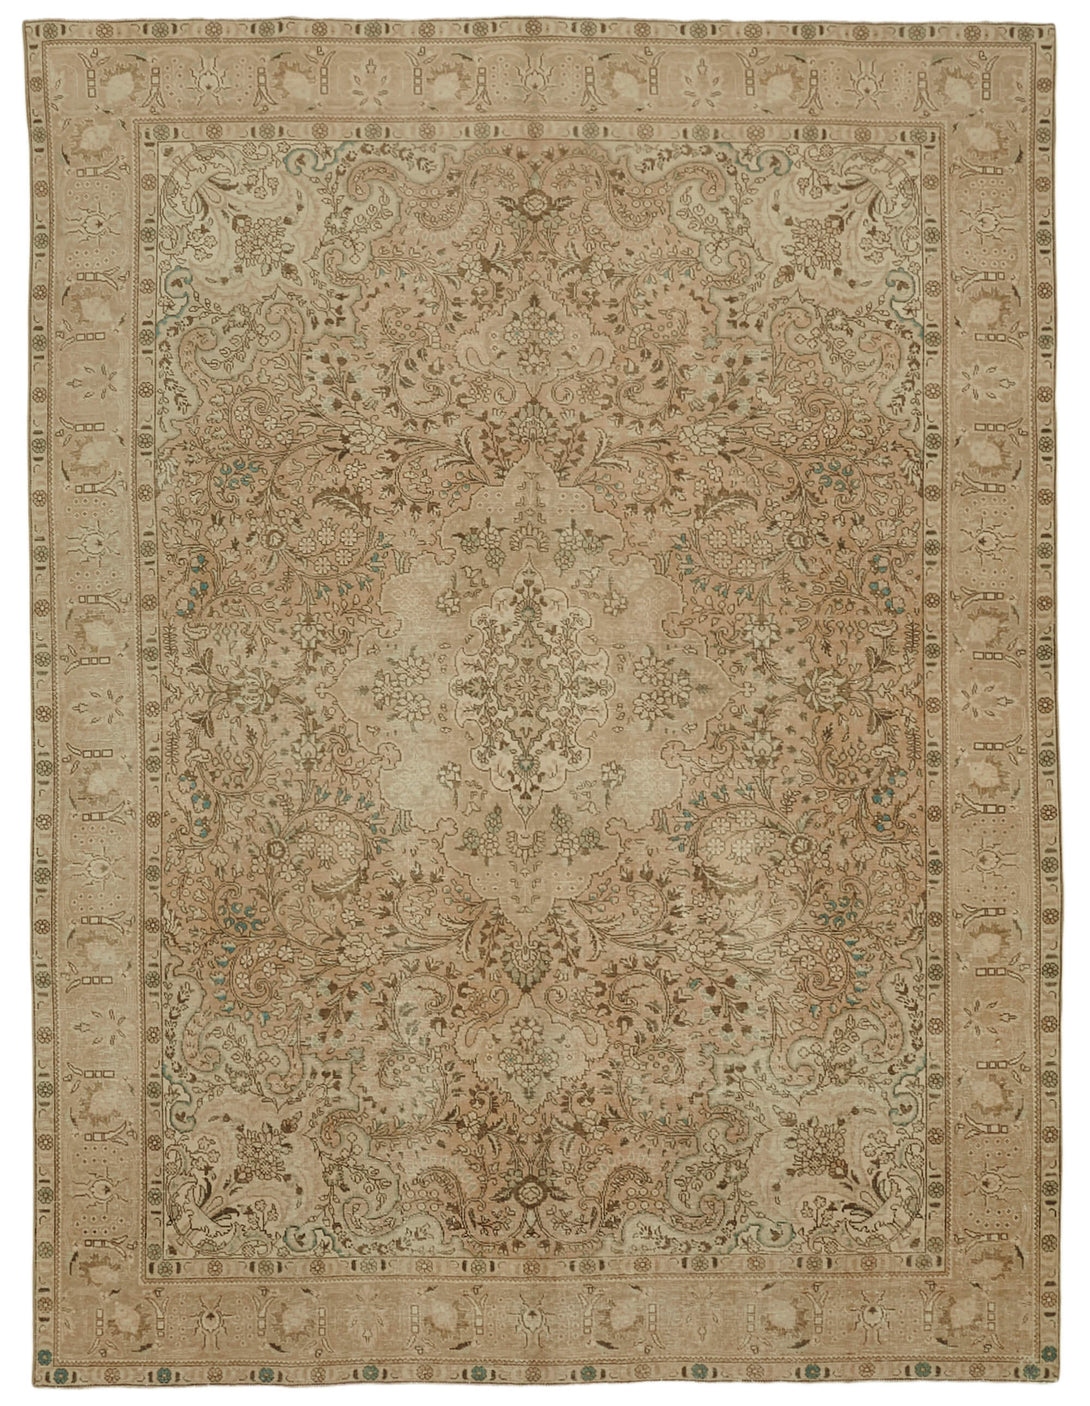 Handmade Persian Vintage Area Rug > Design# OL-AC-41057 > Size: 9'-5" x 12'-4", Carpet Culture Rugs, Handmade Rugs, NYC Rugs, New Rugs, Shop Rugs, Rug Store, Outlet Rugs, SoHo Rugs, Rugs in USA